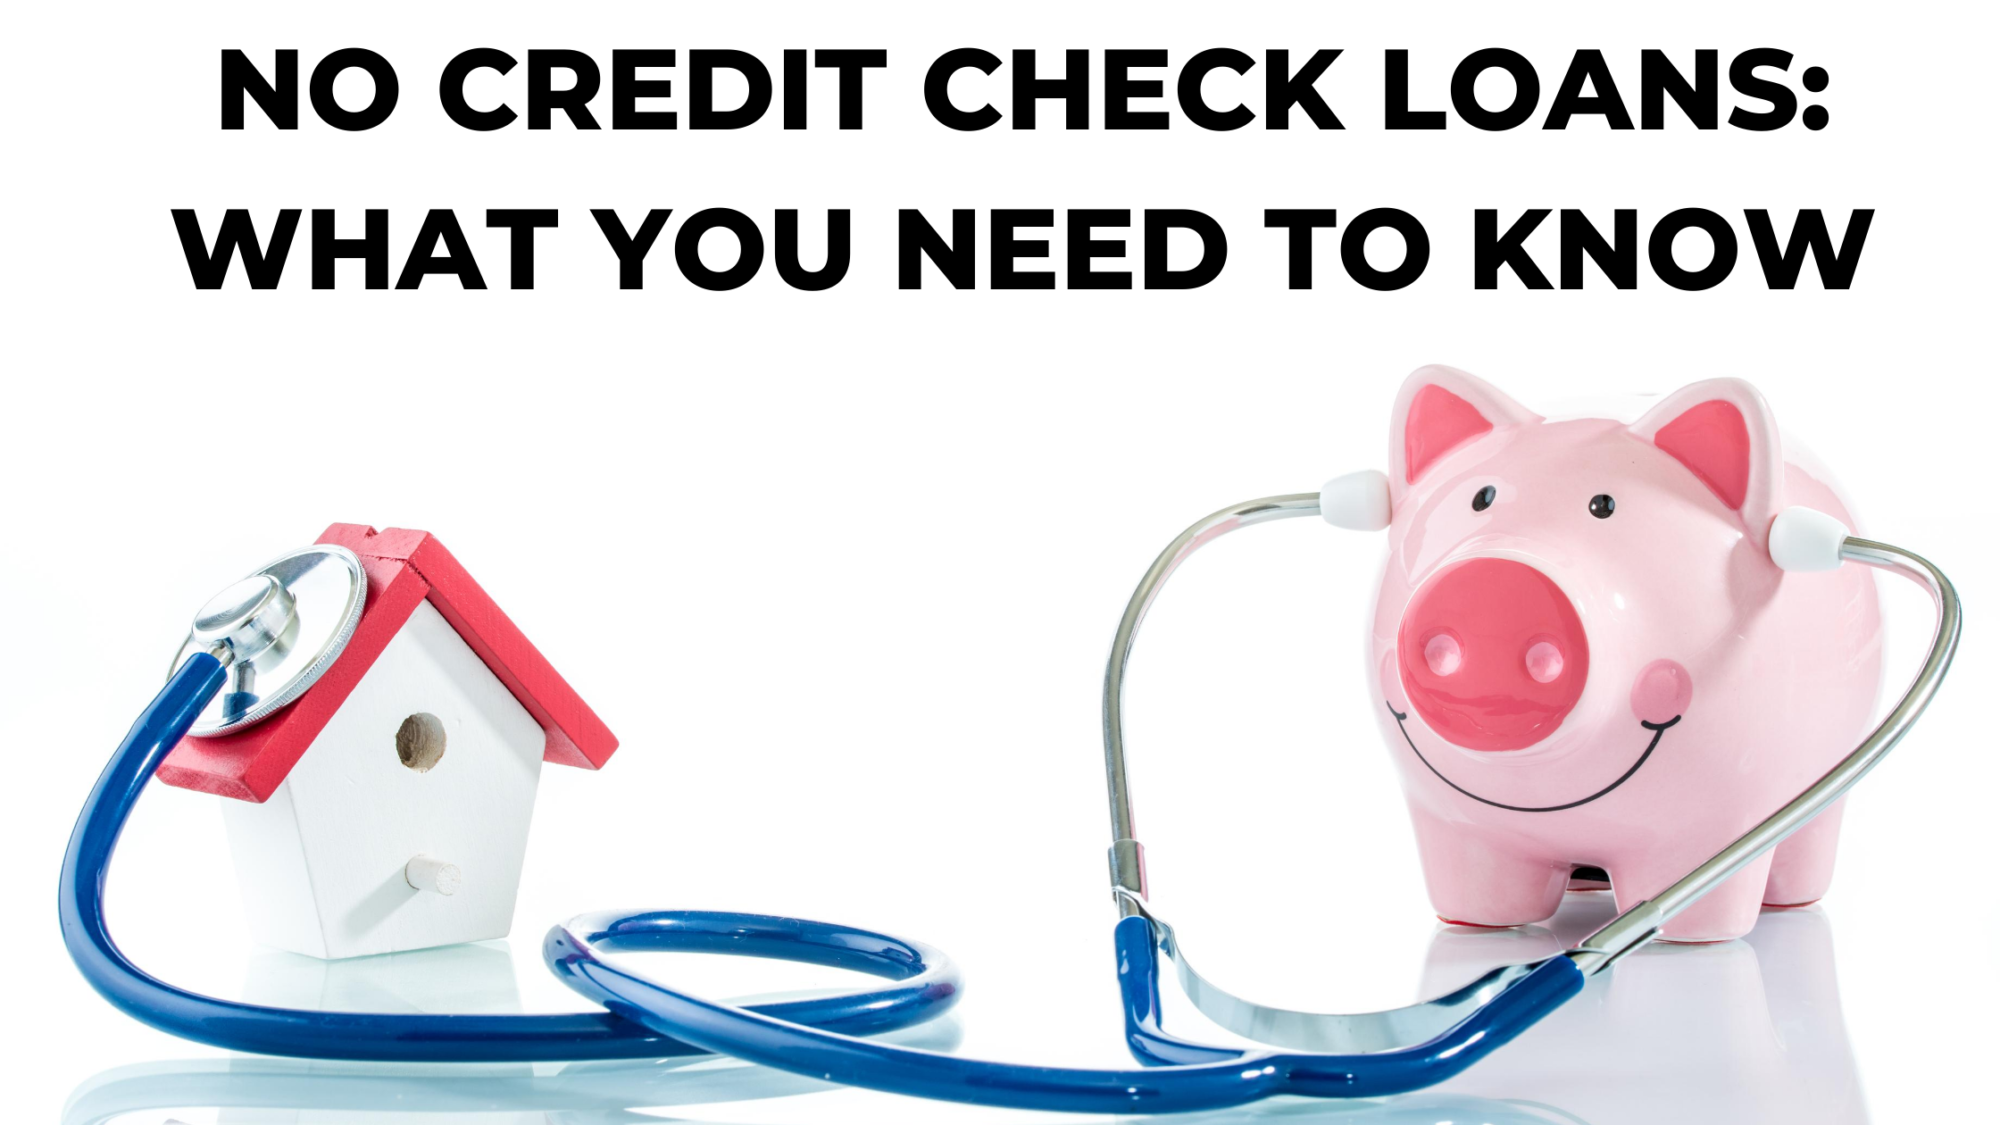 NO CREDIT CHECK LOANS: WHAT YOU NEED TO KNOW